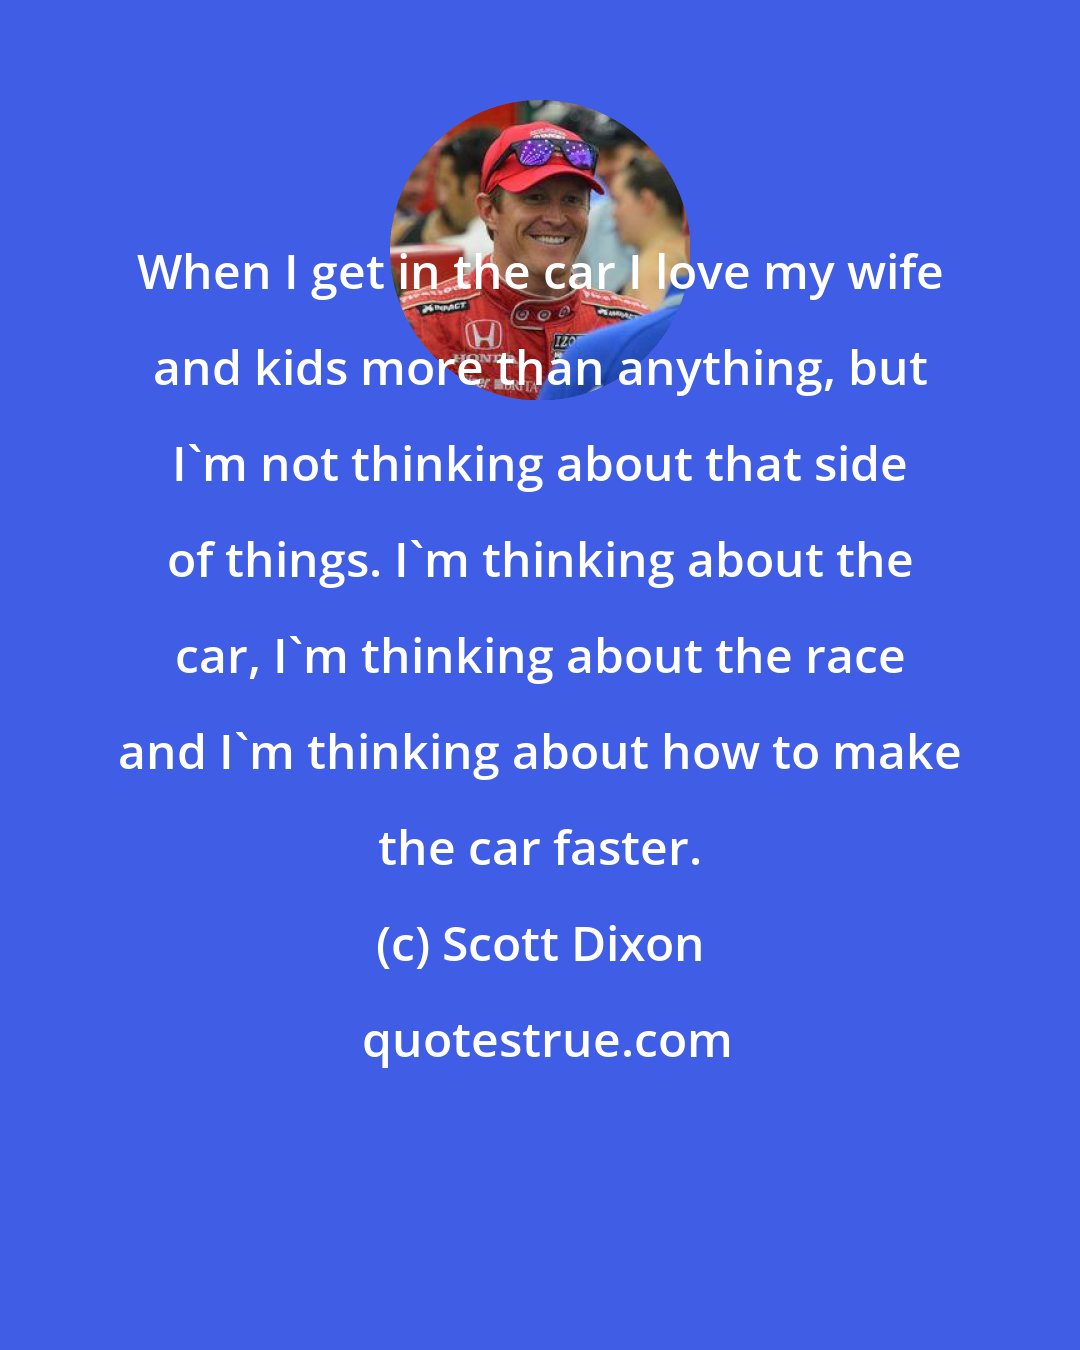 Scott Dixon: When I get in the car I love my wife and kids more than anything, but I'm not thinking about that side of things. I'm thinking about the car, I'm thinking about the race and I'm thinking about how to make the car faster.